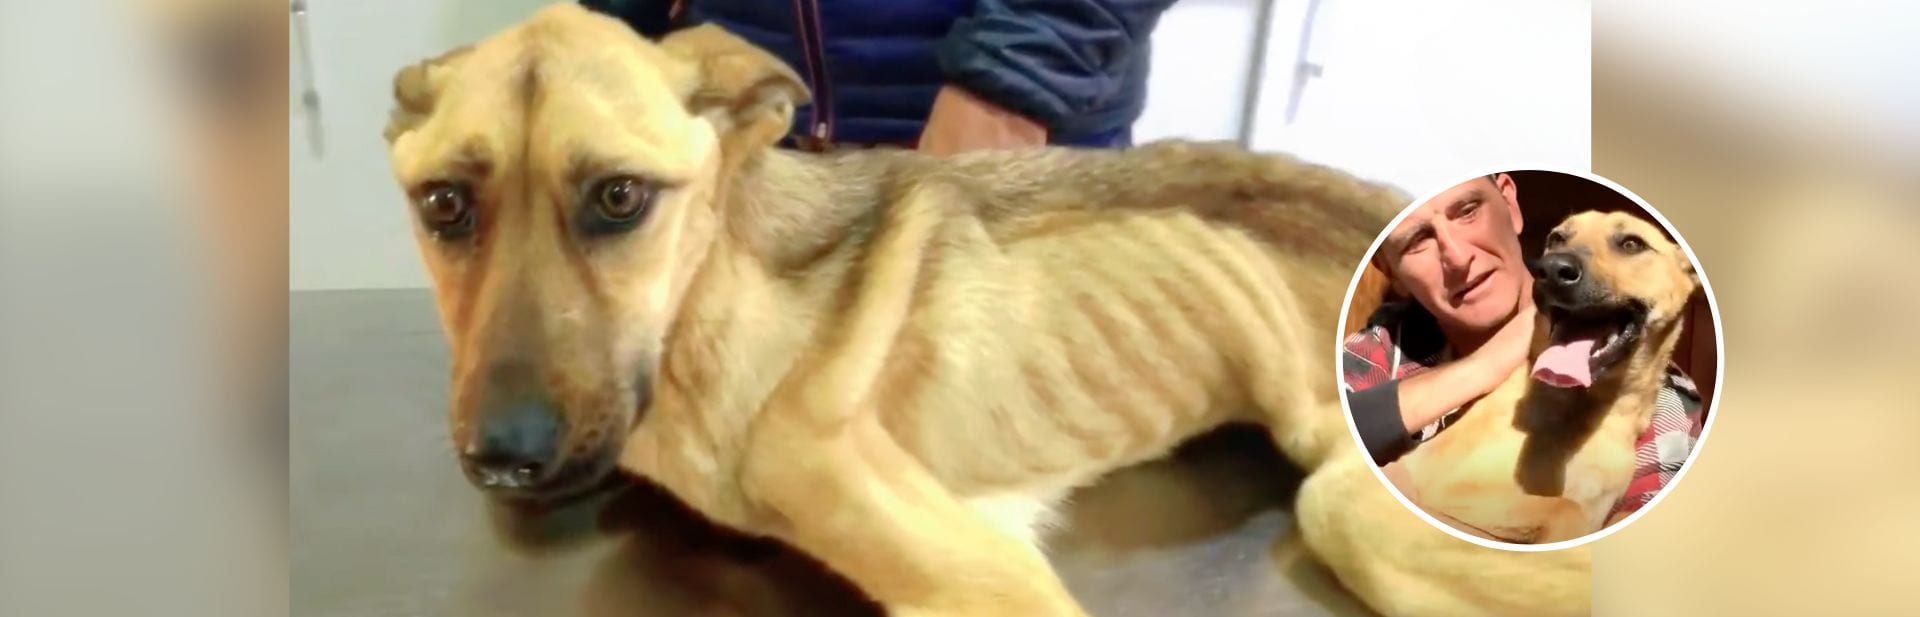 Starving Pup Fights For Life Until A Loving Heart Steps In